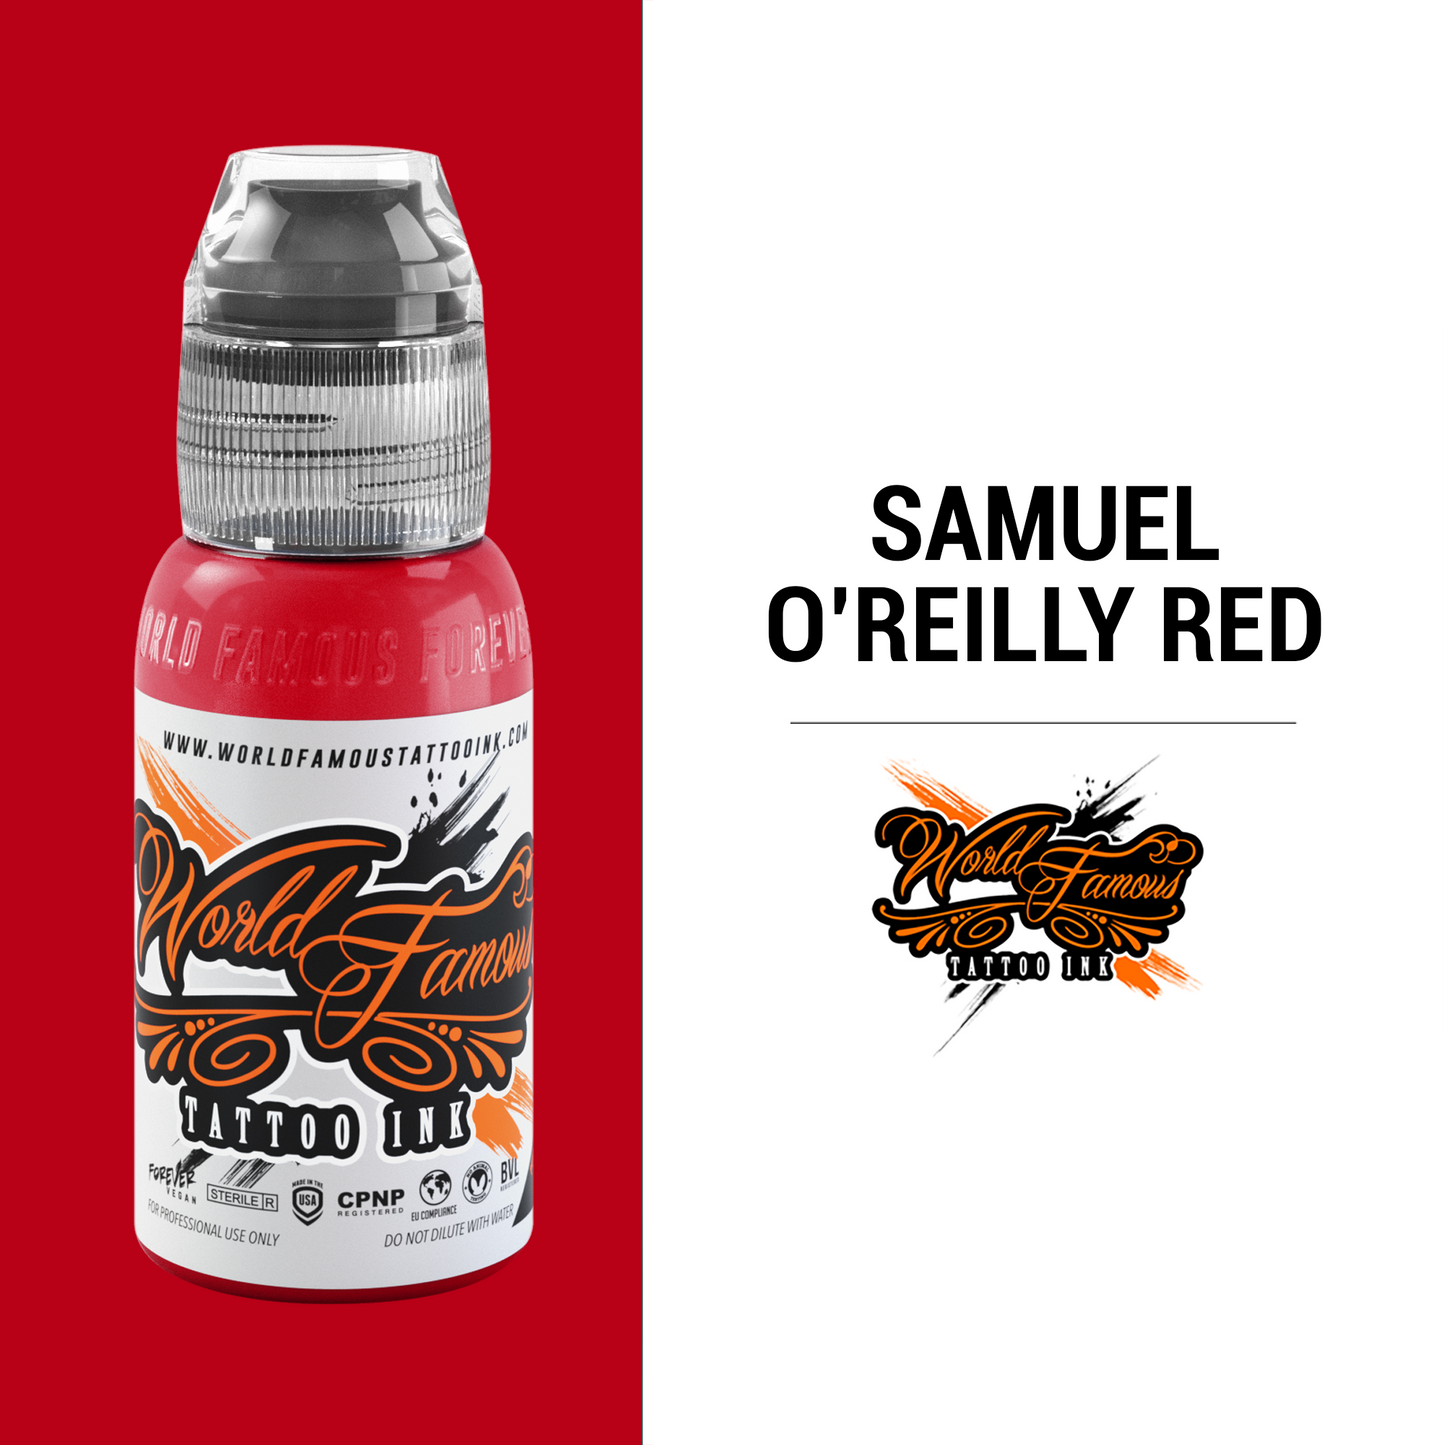 Samuel O'Reilly Red | World Famous Tattoo Ink